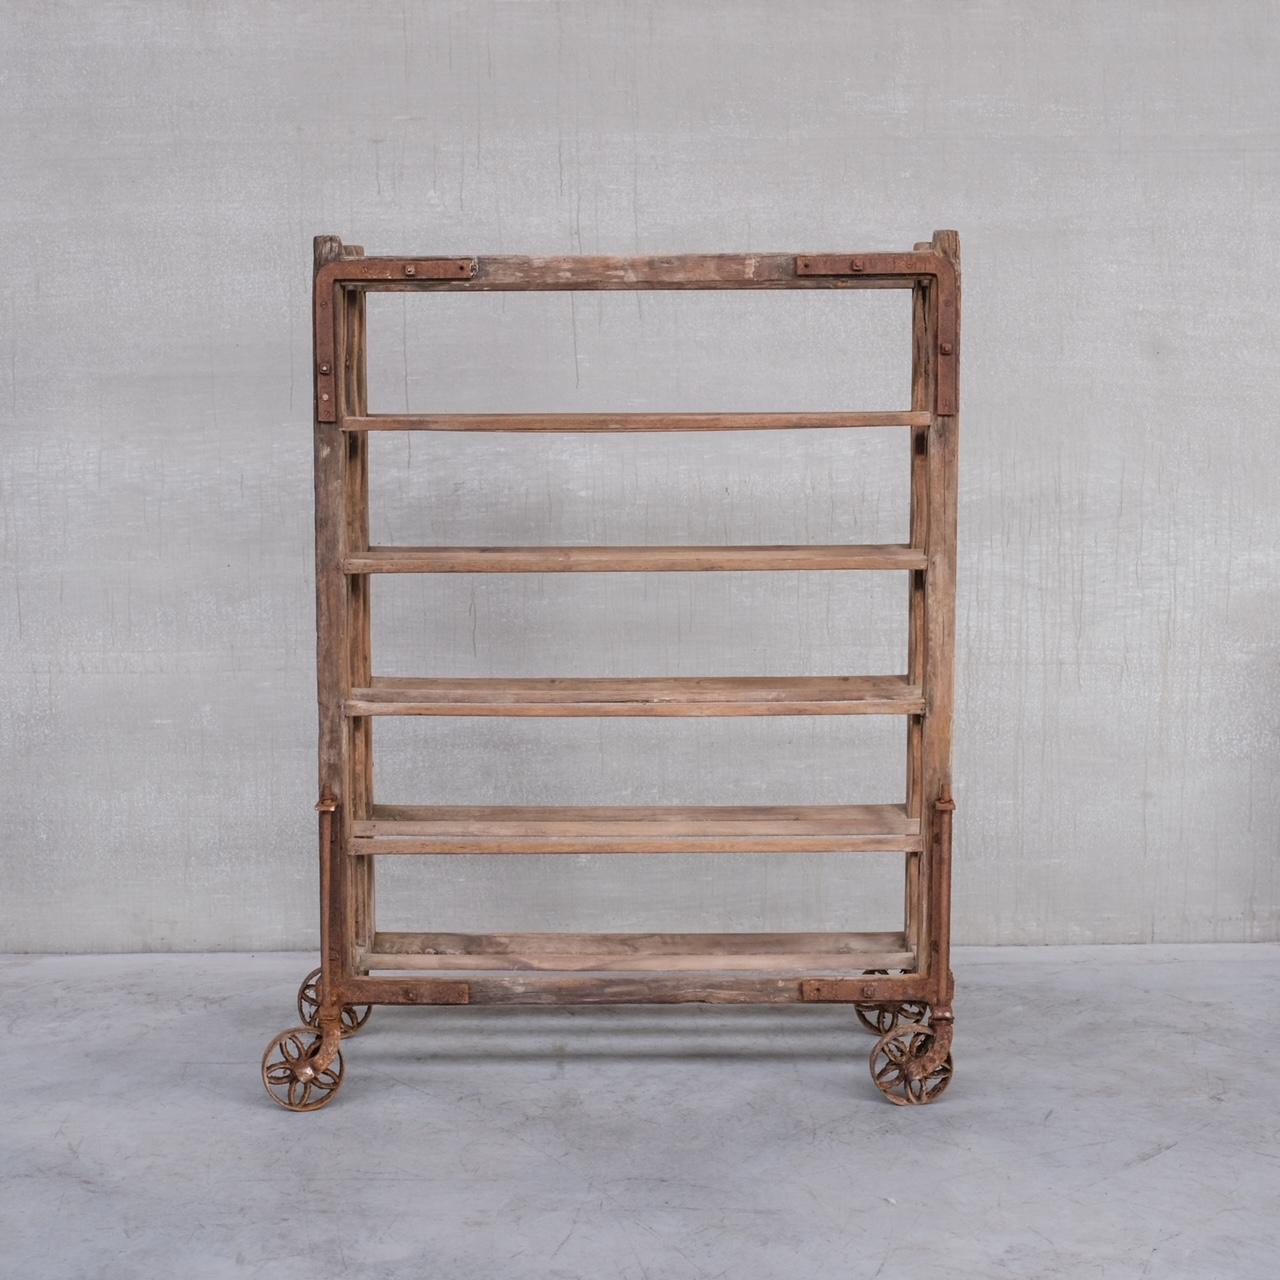 A increasingly rare totally authentic bakers shelving trolley of large size. 

France, c1920s. 

Heaps of character with the worn iron wheels and the wood which has seen years of use. 

Structurally still very sound. Some scuffs and wear